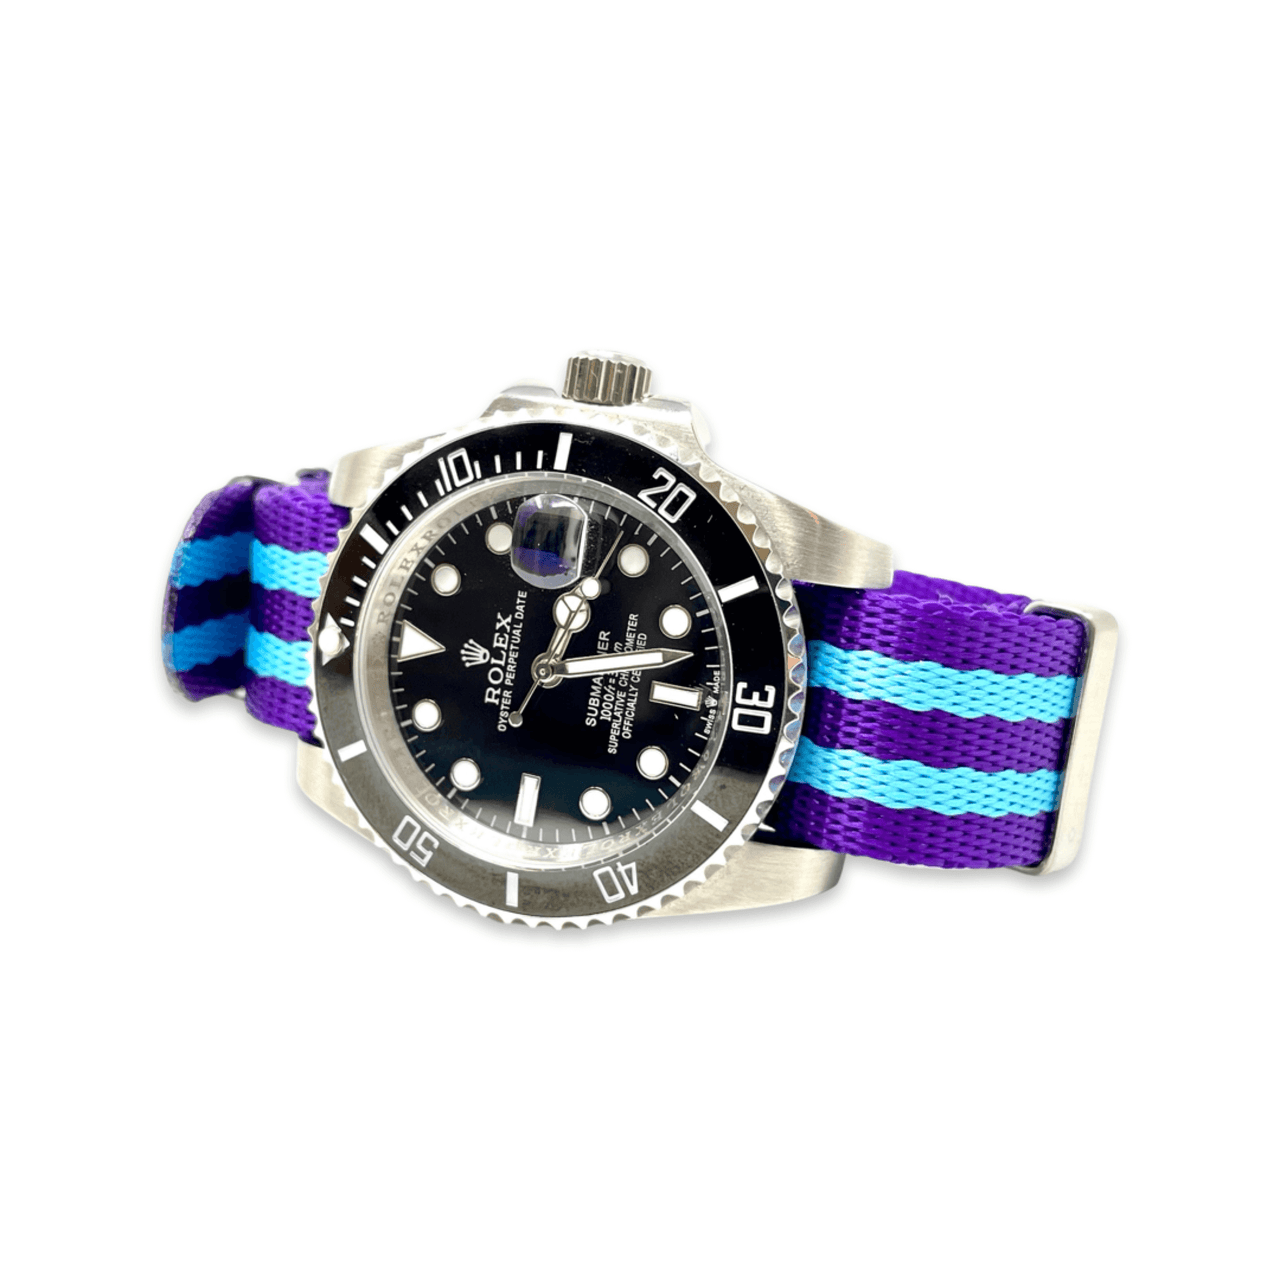 Premium Thick Woven Military Style Watch Strap - Purple Blue Stripes